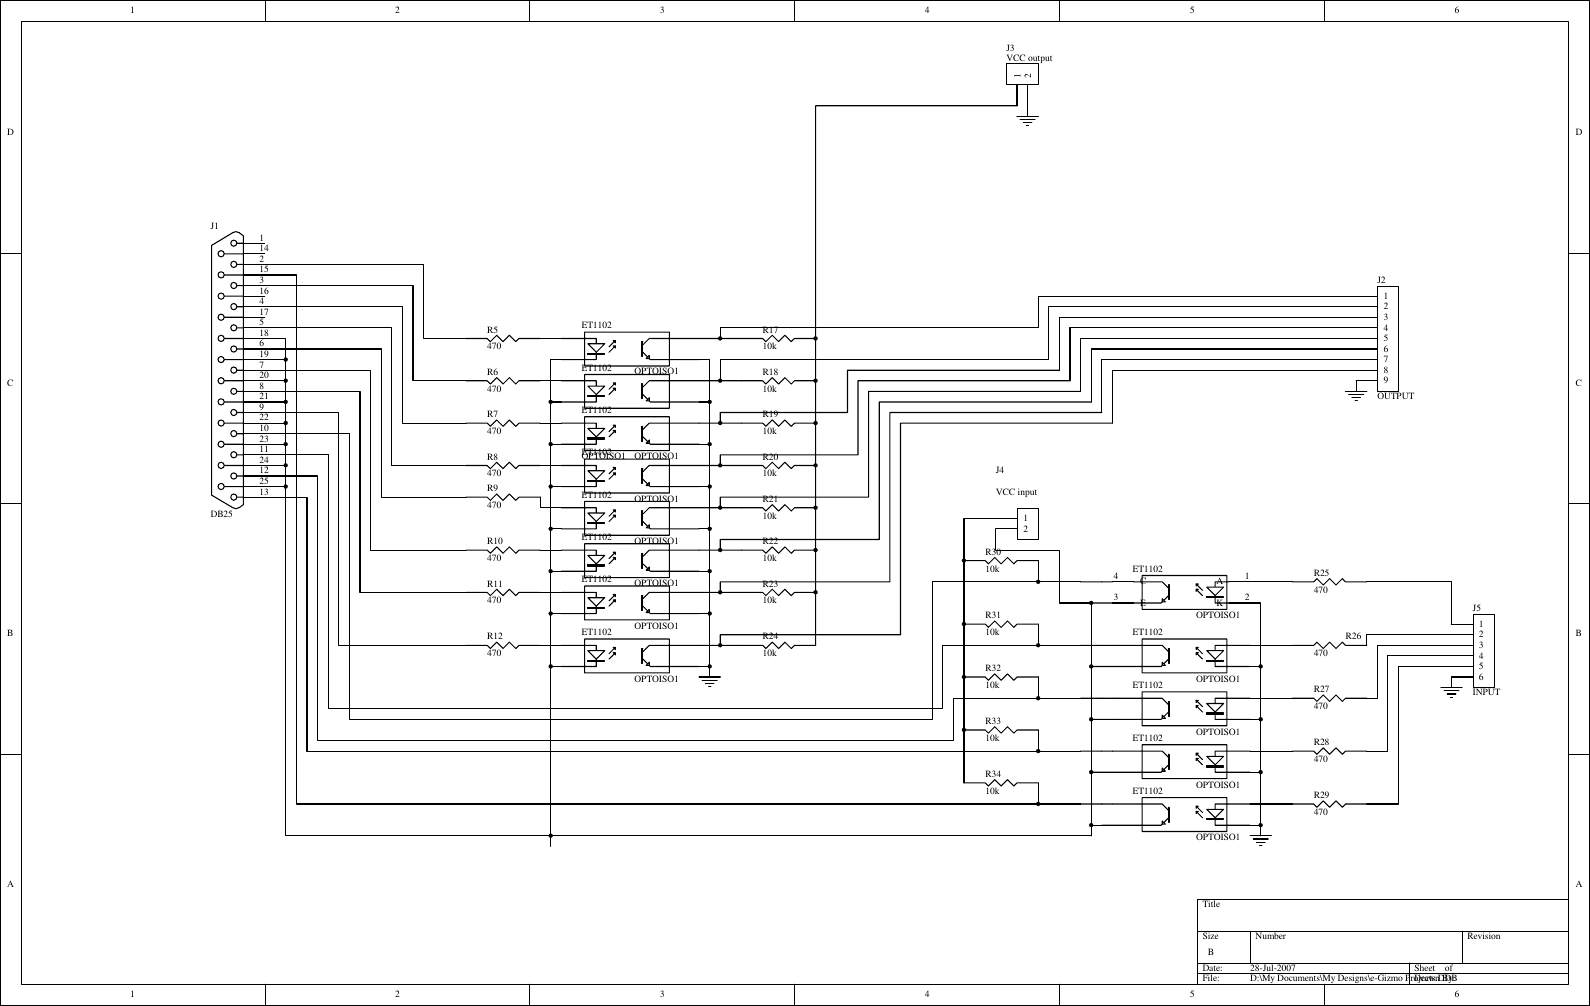 Page 1 of 1 - Protel Schematic Parallel Port